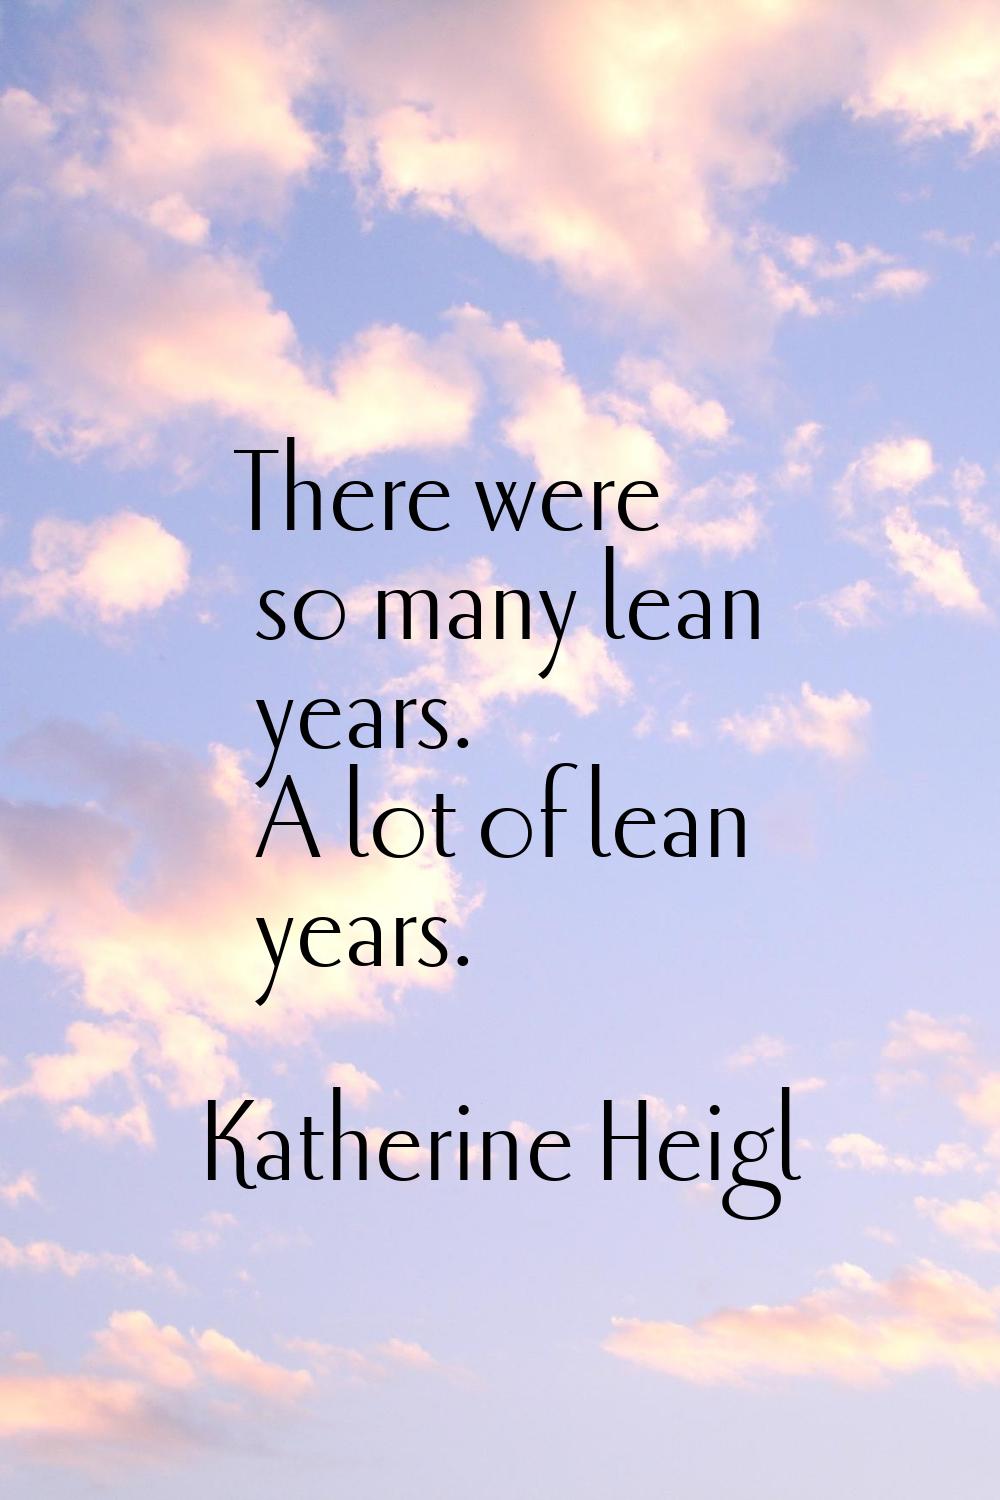 There were so many lean years. A lot of lean years.